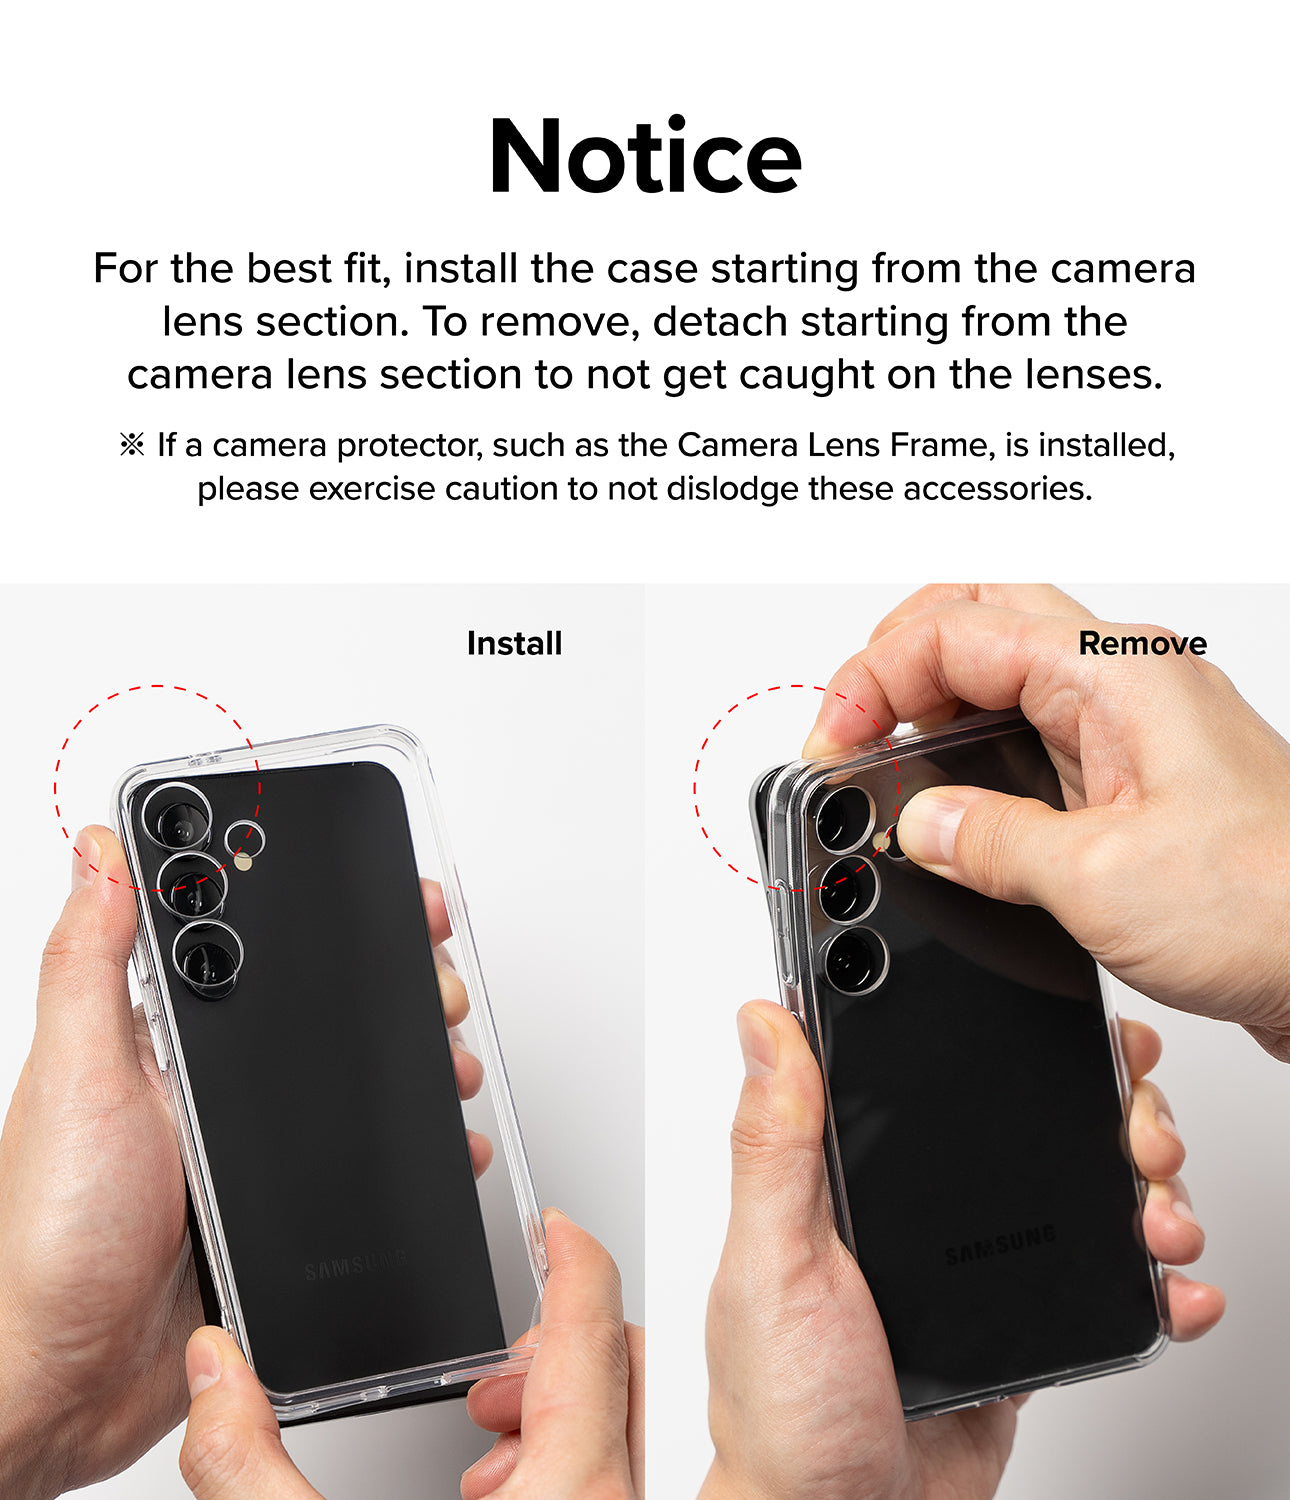 Galaxy S24 Case | Fusion Design - Seoul - Notice. For the best fit, install the case starting from the camera lens section. To remove, detach starting from the camera lens section to not get caught on the lenses.